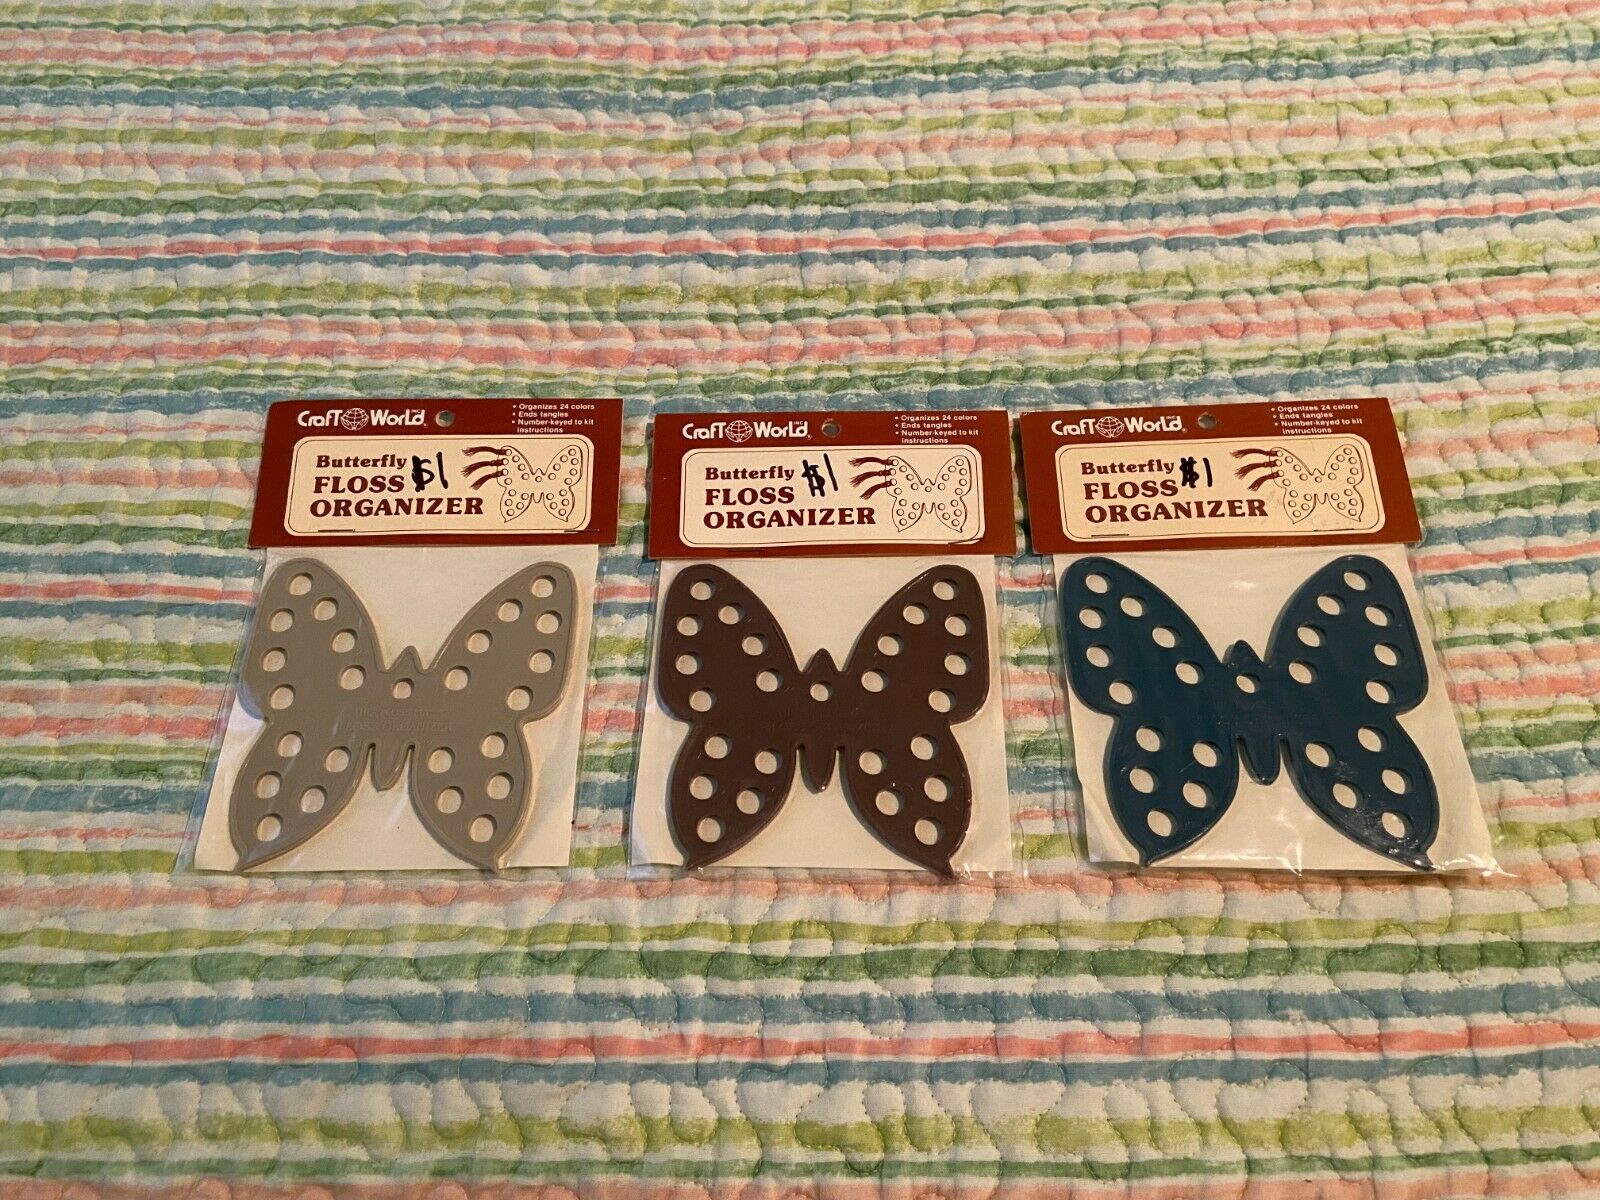 Vintage Butterfly Floss Organizer New In Package (3) Craft World